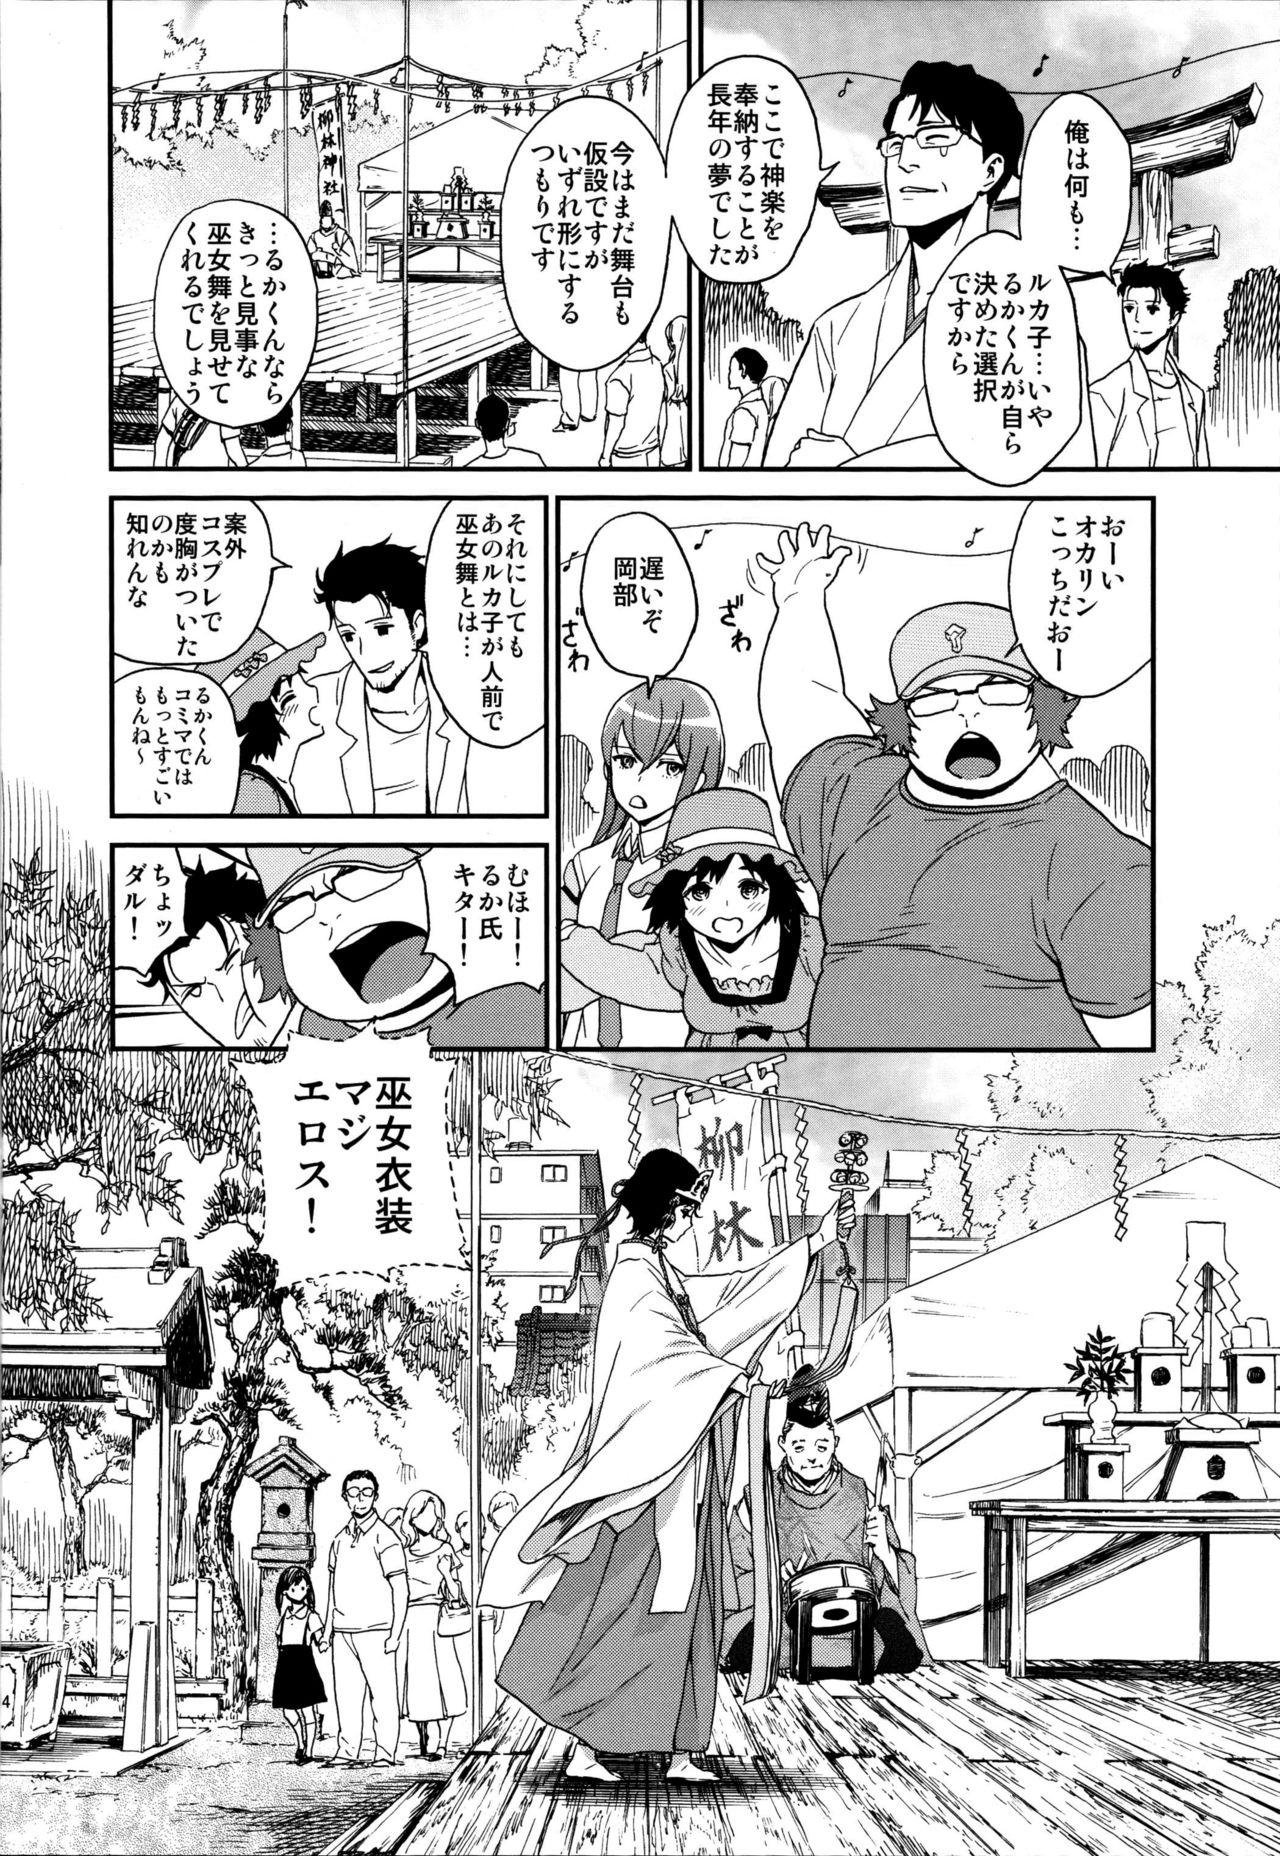 Jeans Yaotome no Chrysanthemum - Steinsgate Stepmother - Page 3